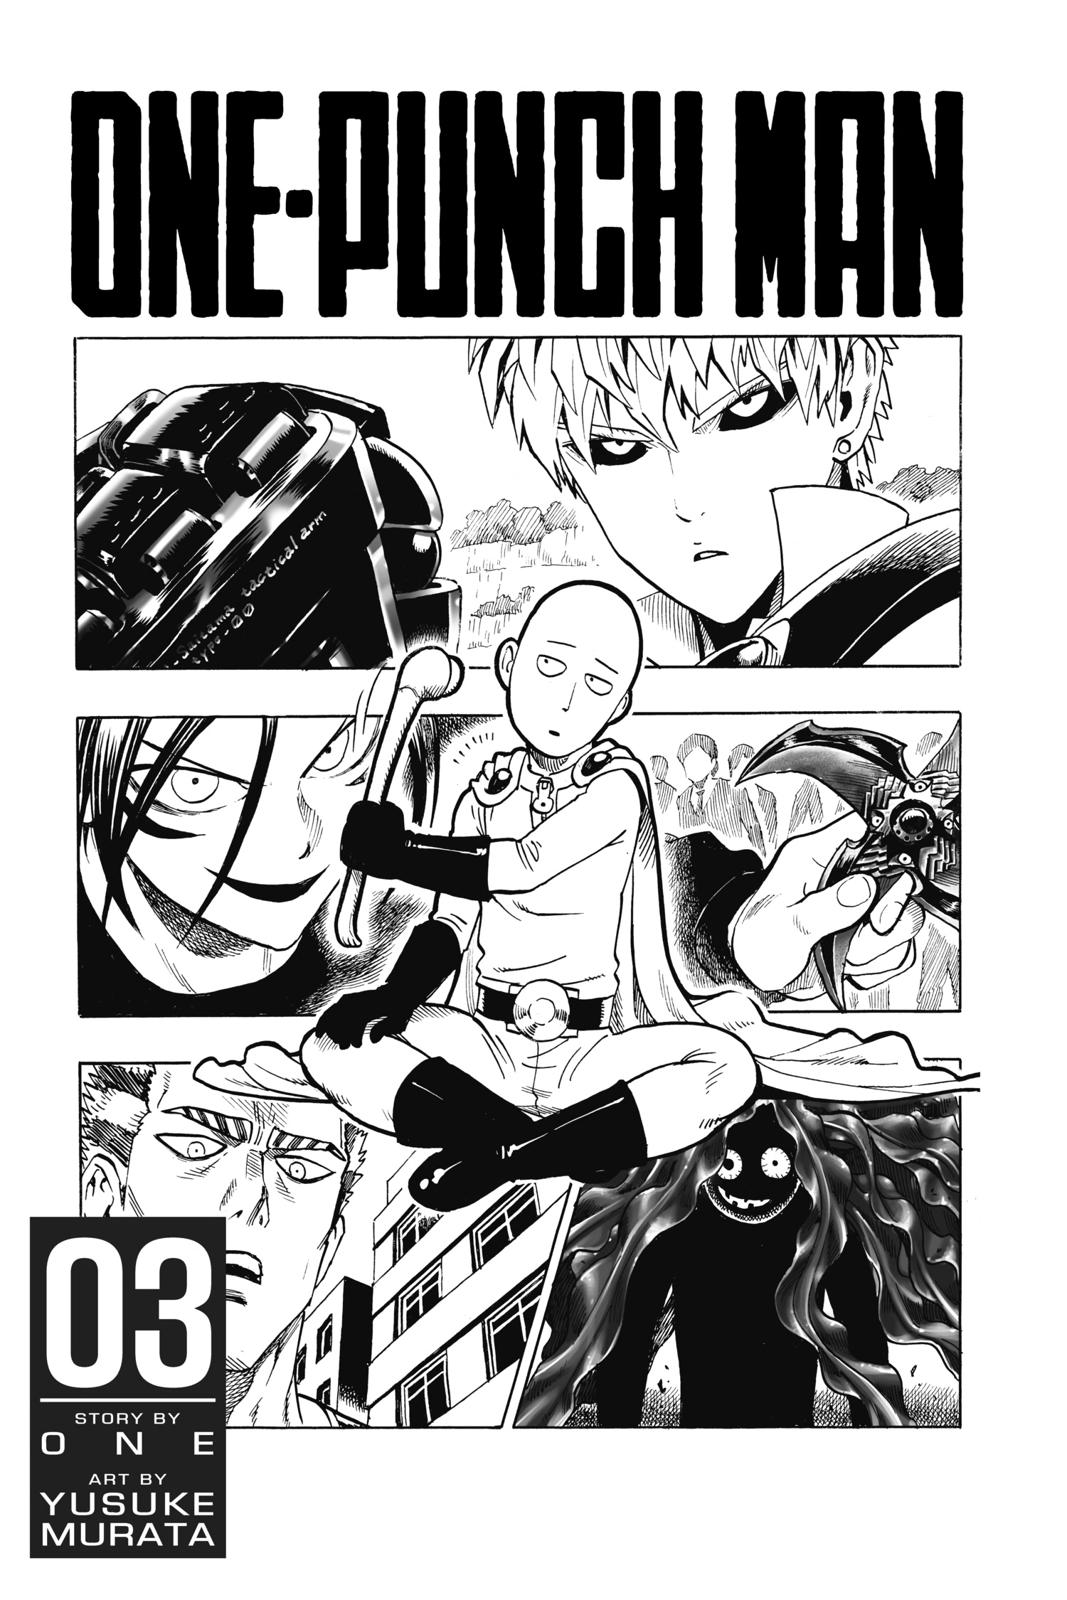 One-Punch Man, Punch 16 image 04